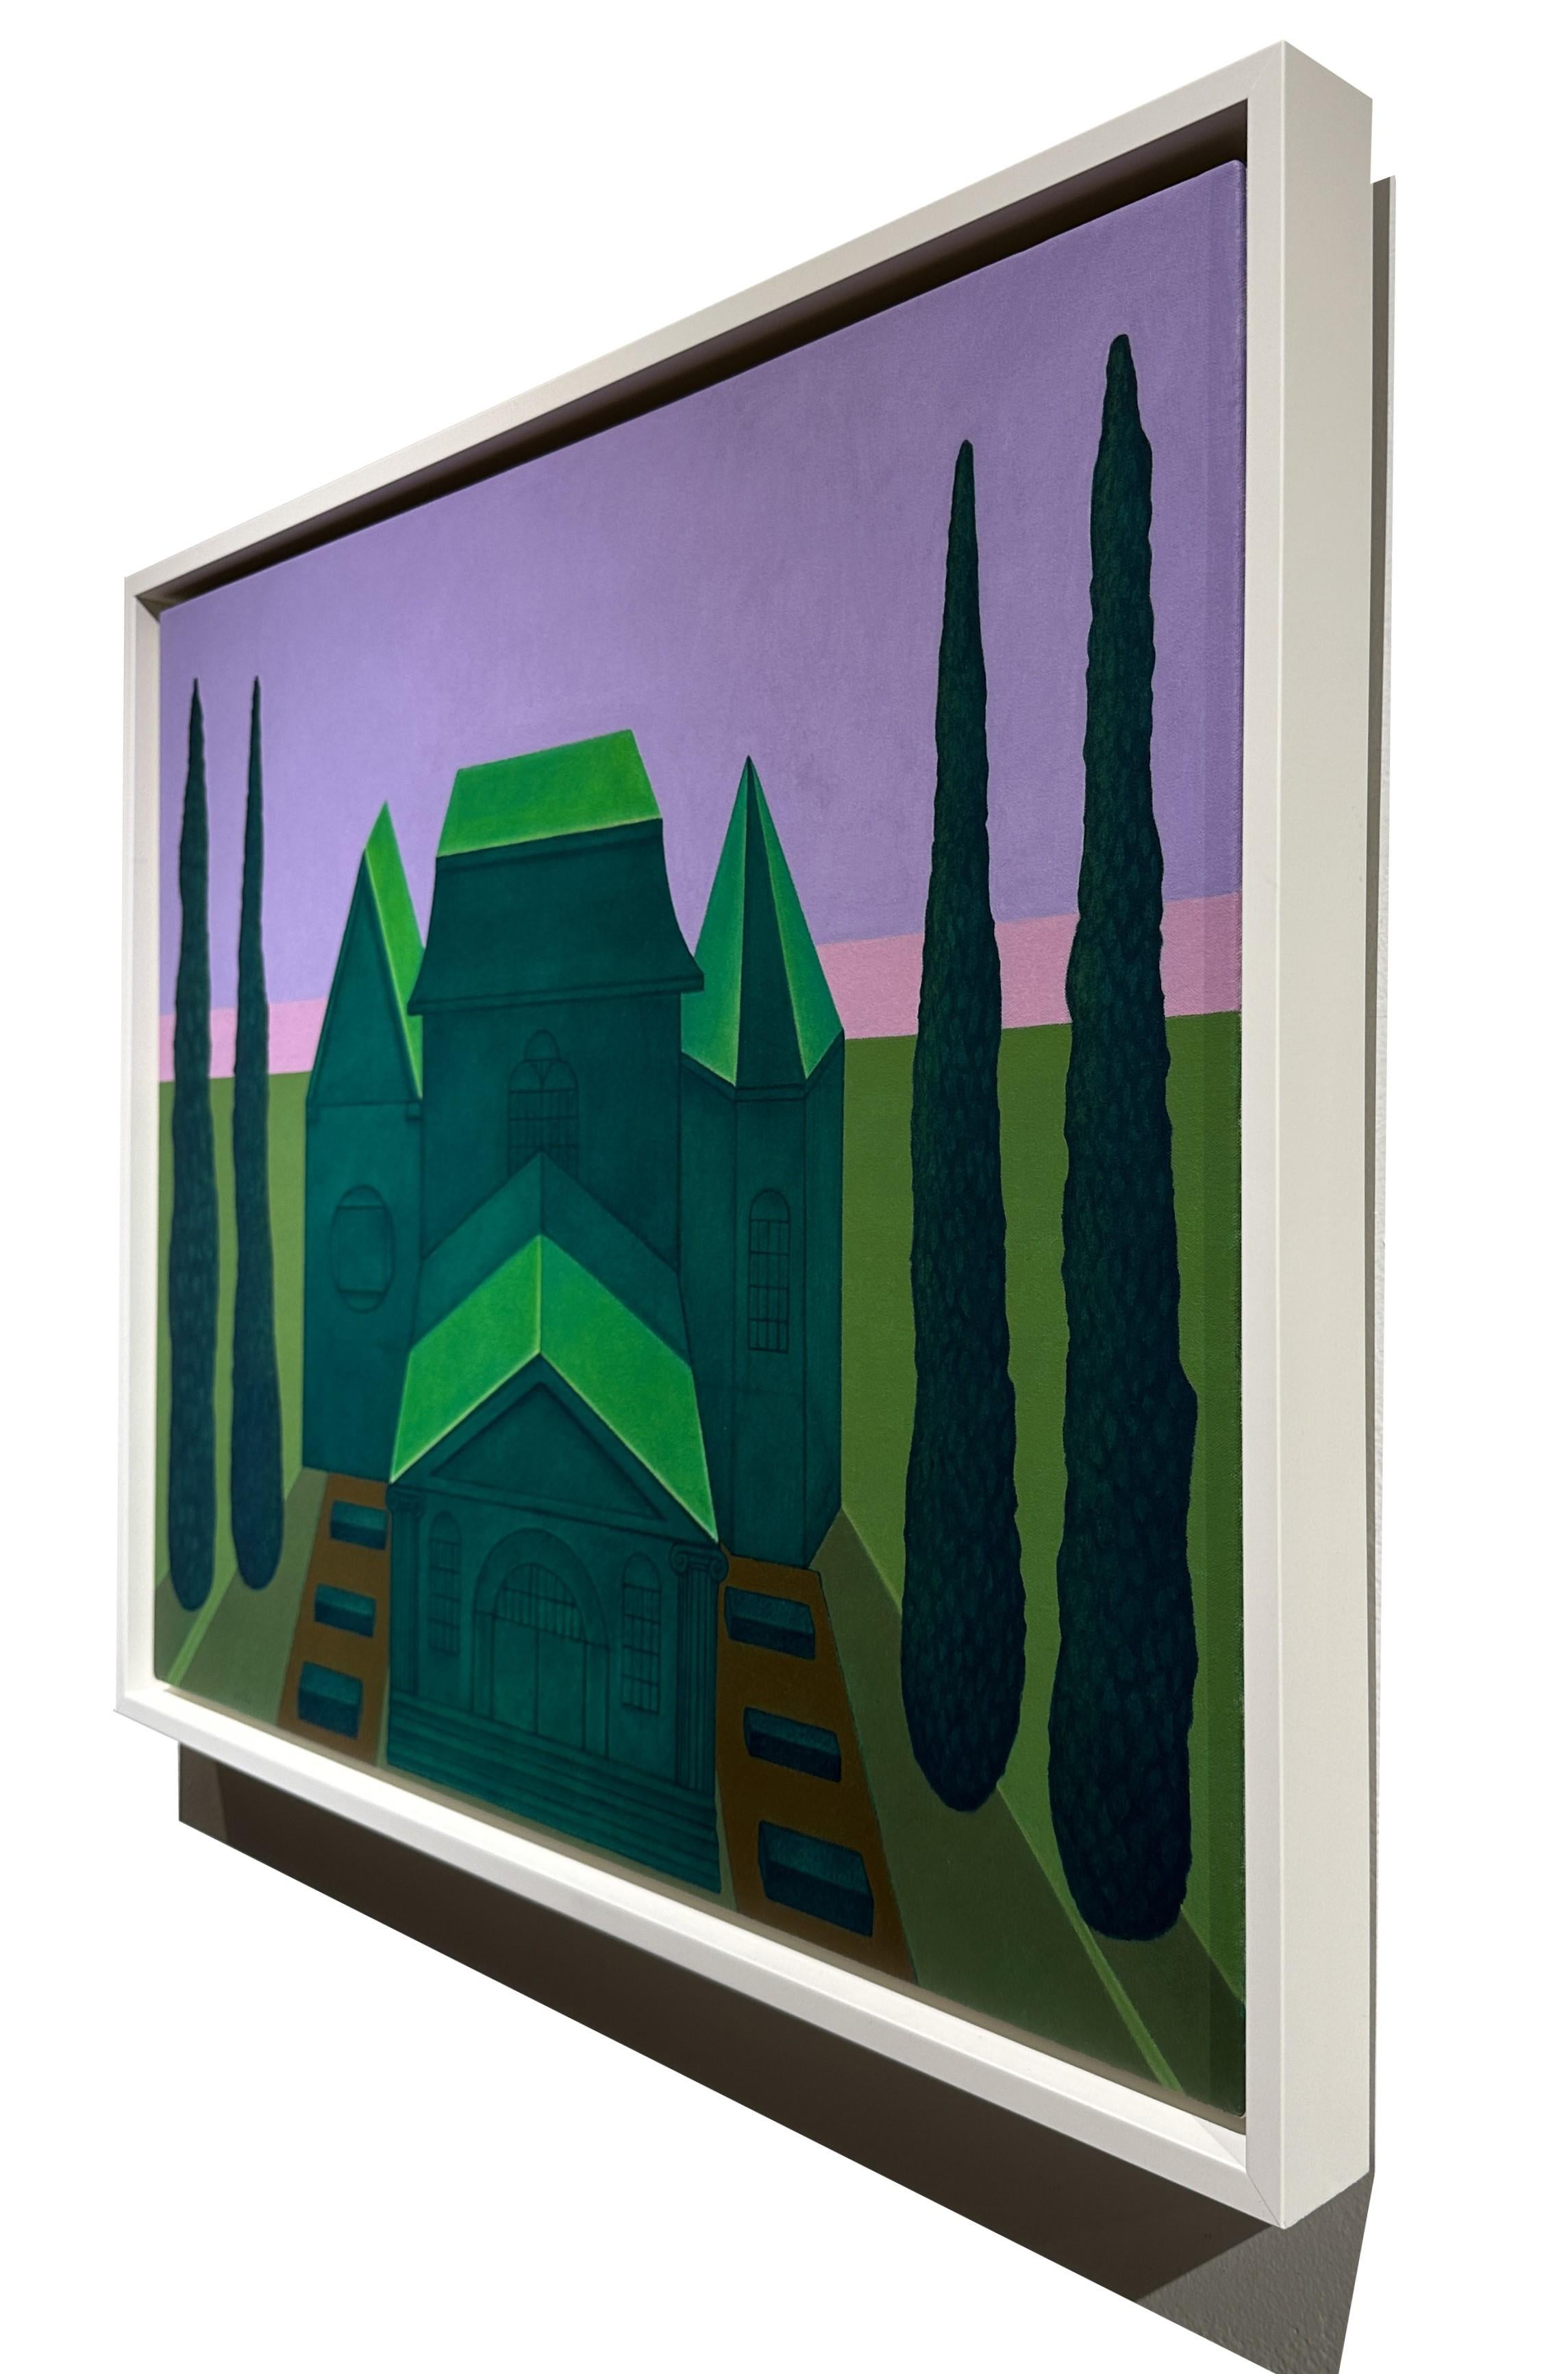 A classical structure is cast in a green hue as the sun sets on this surreal scene by John Hrehov. The perfectly balance scene, with its formal gardens and Italian cypress trees add to the overall aesthetic.  This piece is floated in a white wooden